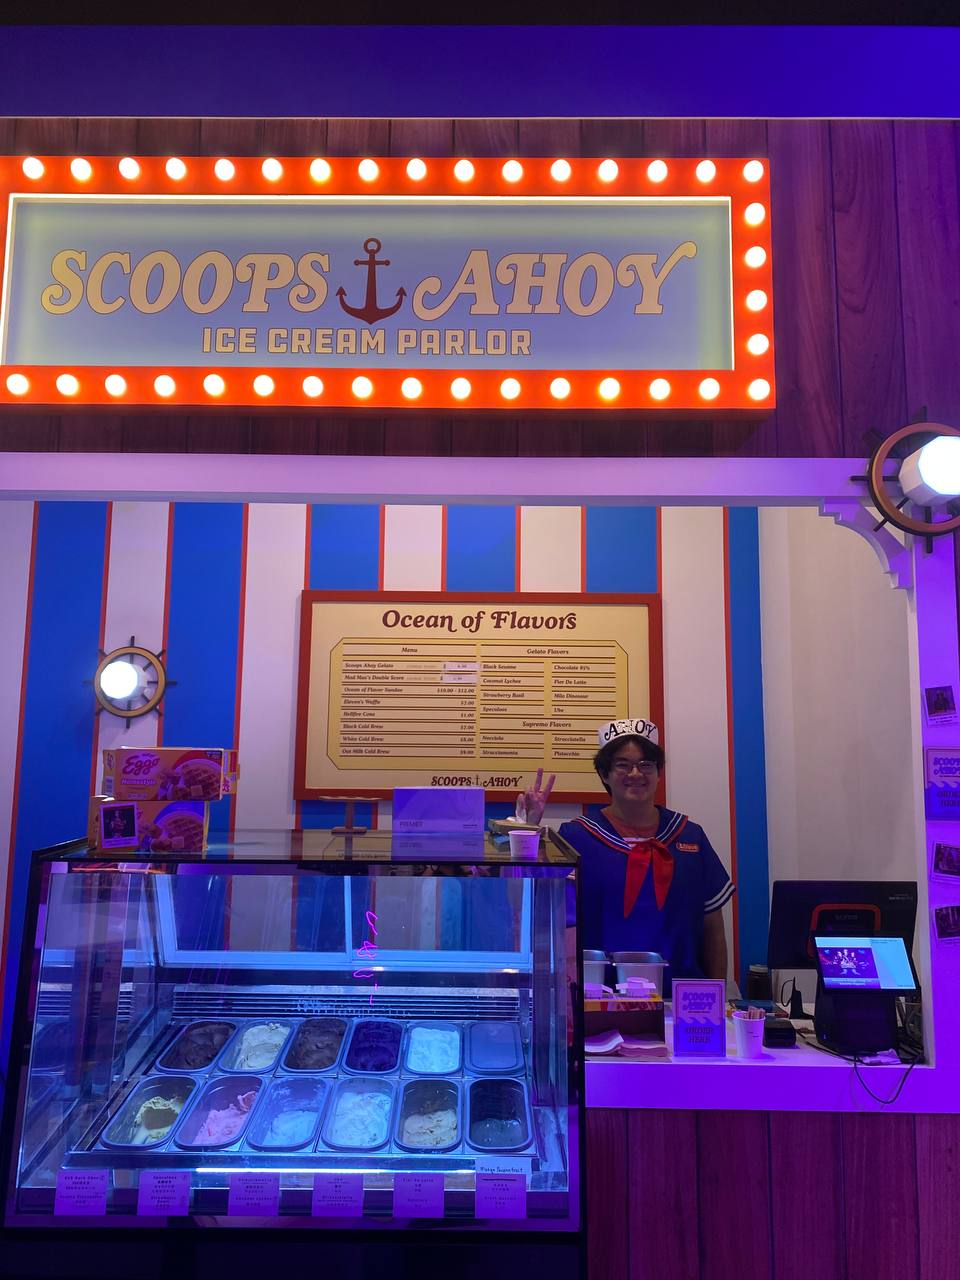 Look forward to unique gelato flavours like Milo Dinosaur atop Eleven’s favourite Waffle or Eddie’s Hellfire Cone from Scoops Ahoy, presented by Burnt Cones.